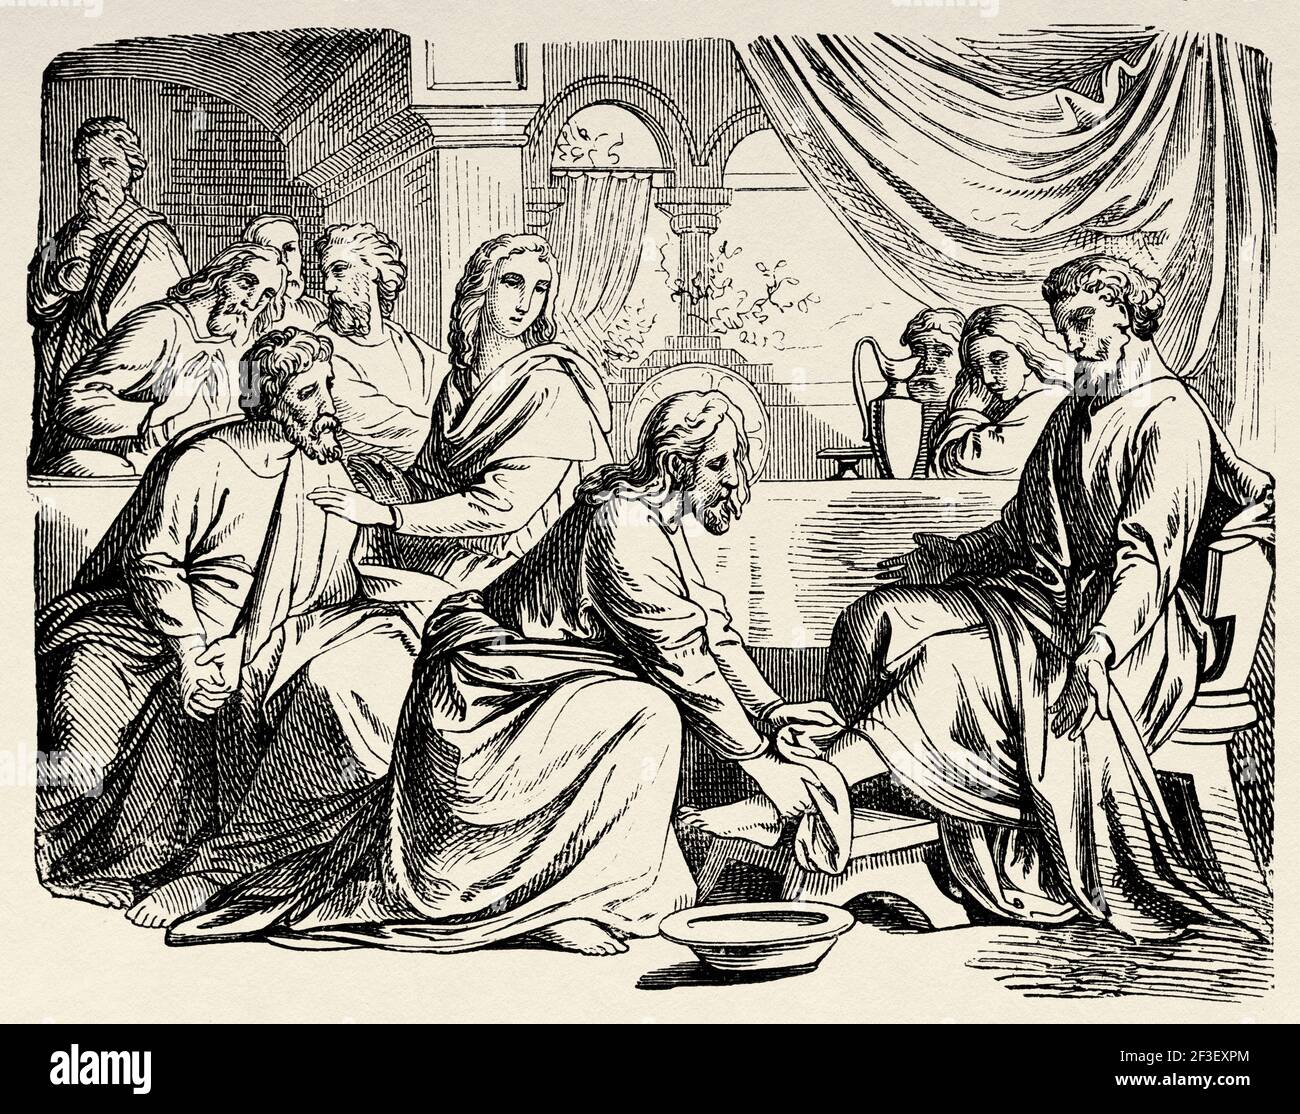 The foot washing. Our Lord Jesus the son of God washes the feet of his disciples. John book, New Testament, Old 19th century engraved illustration from History of the Bible 1883 Stock Photo